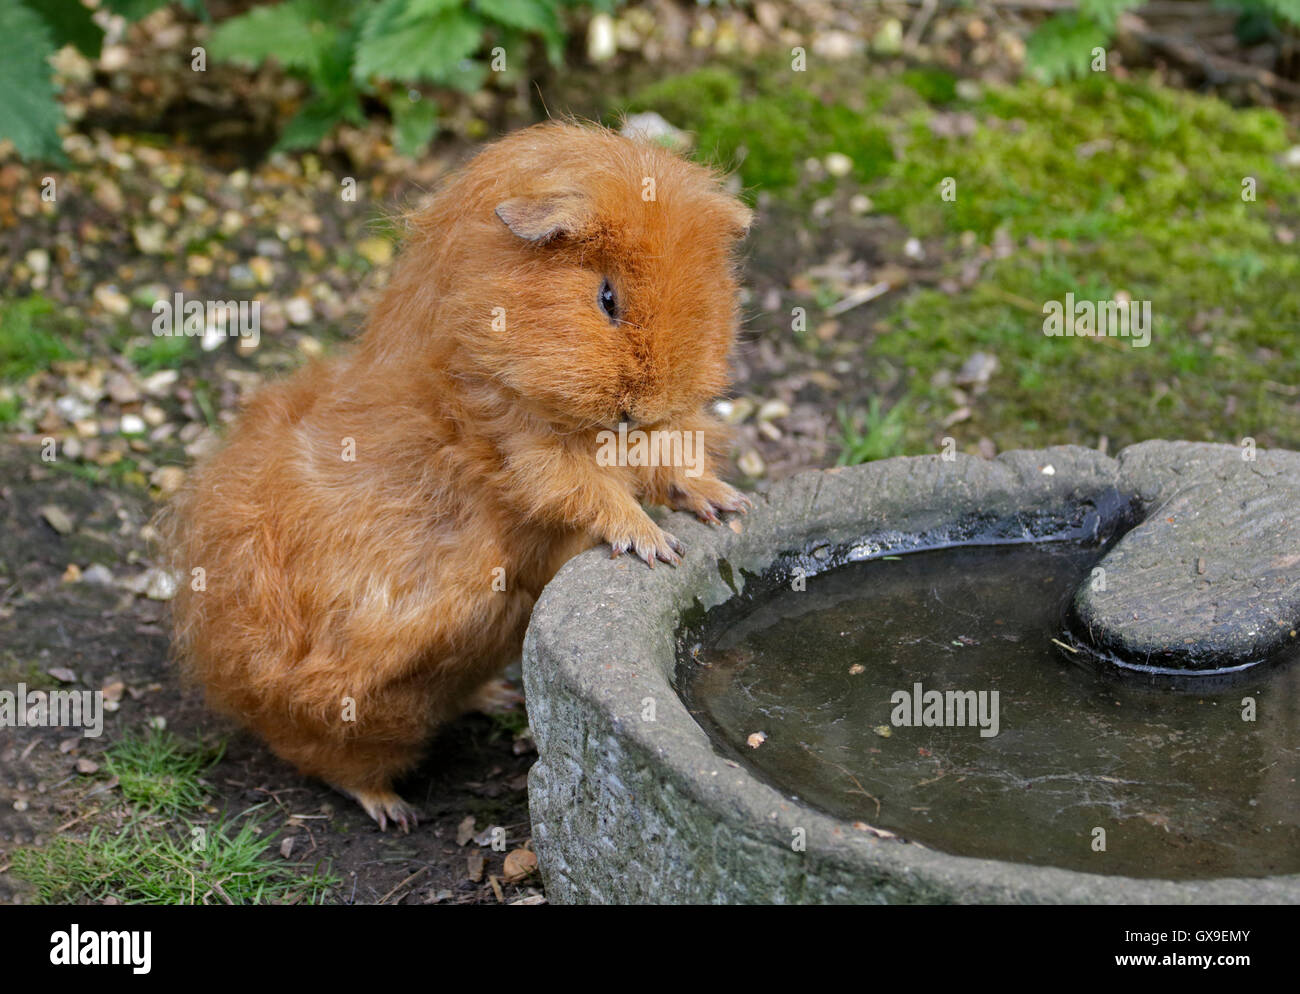 Golden Guinea Pig (cavia porcellus) at Drinking Bowl Stock Photo